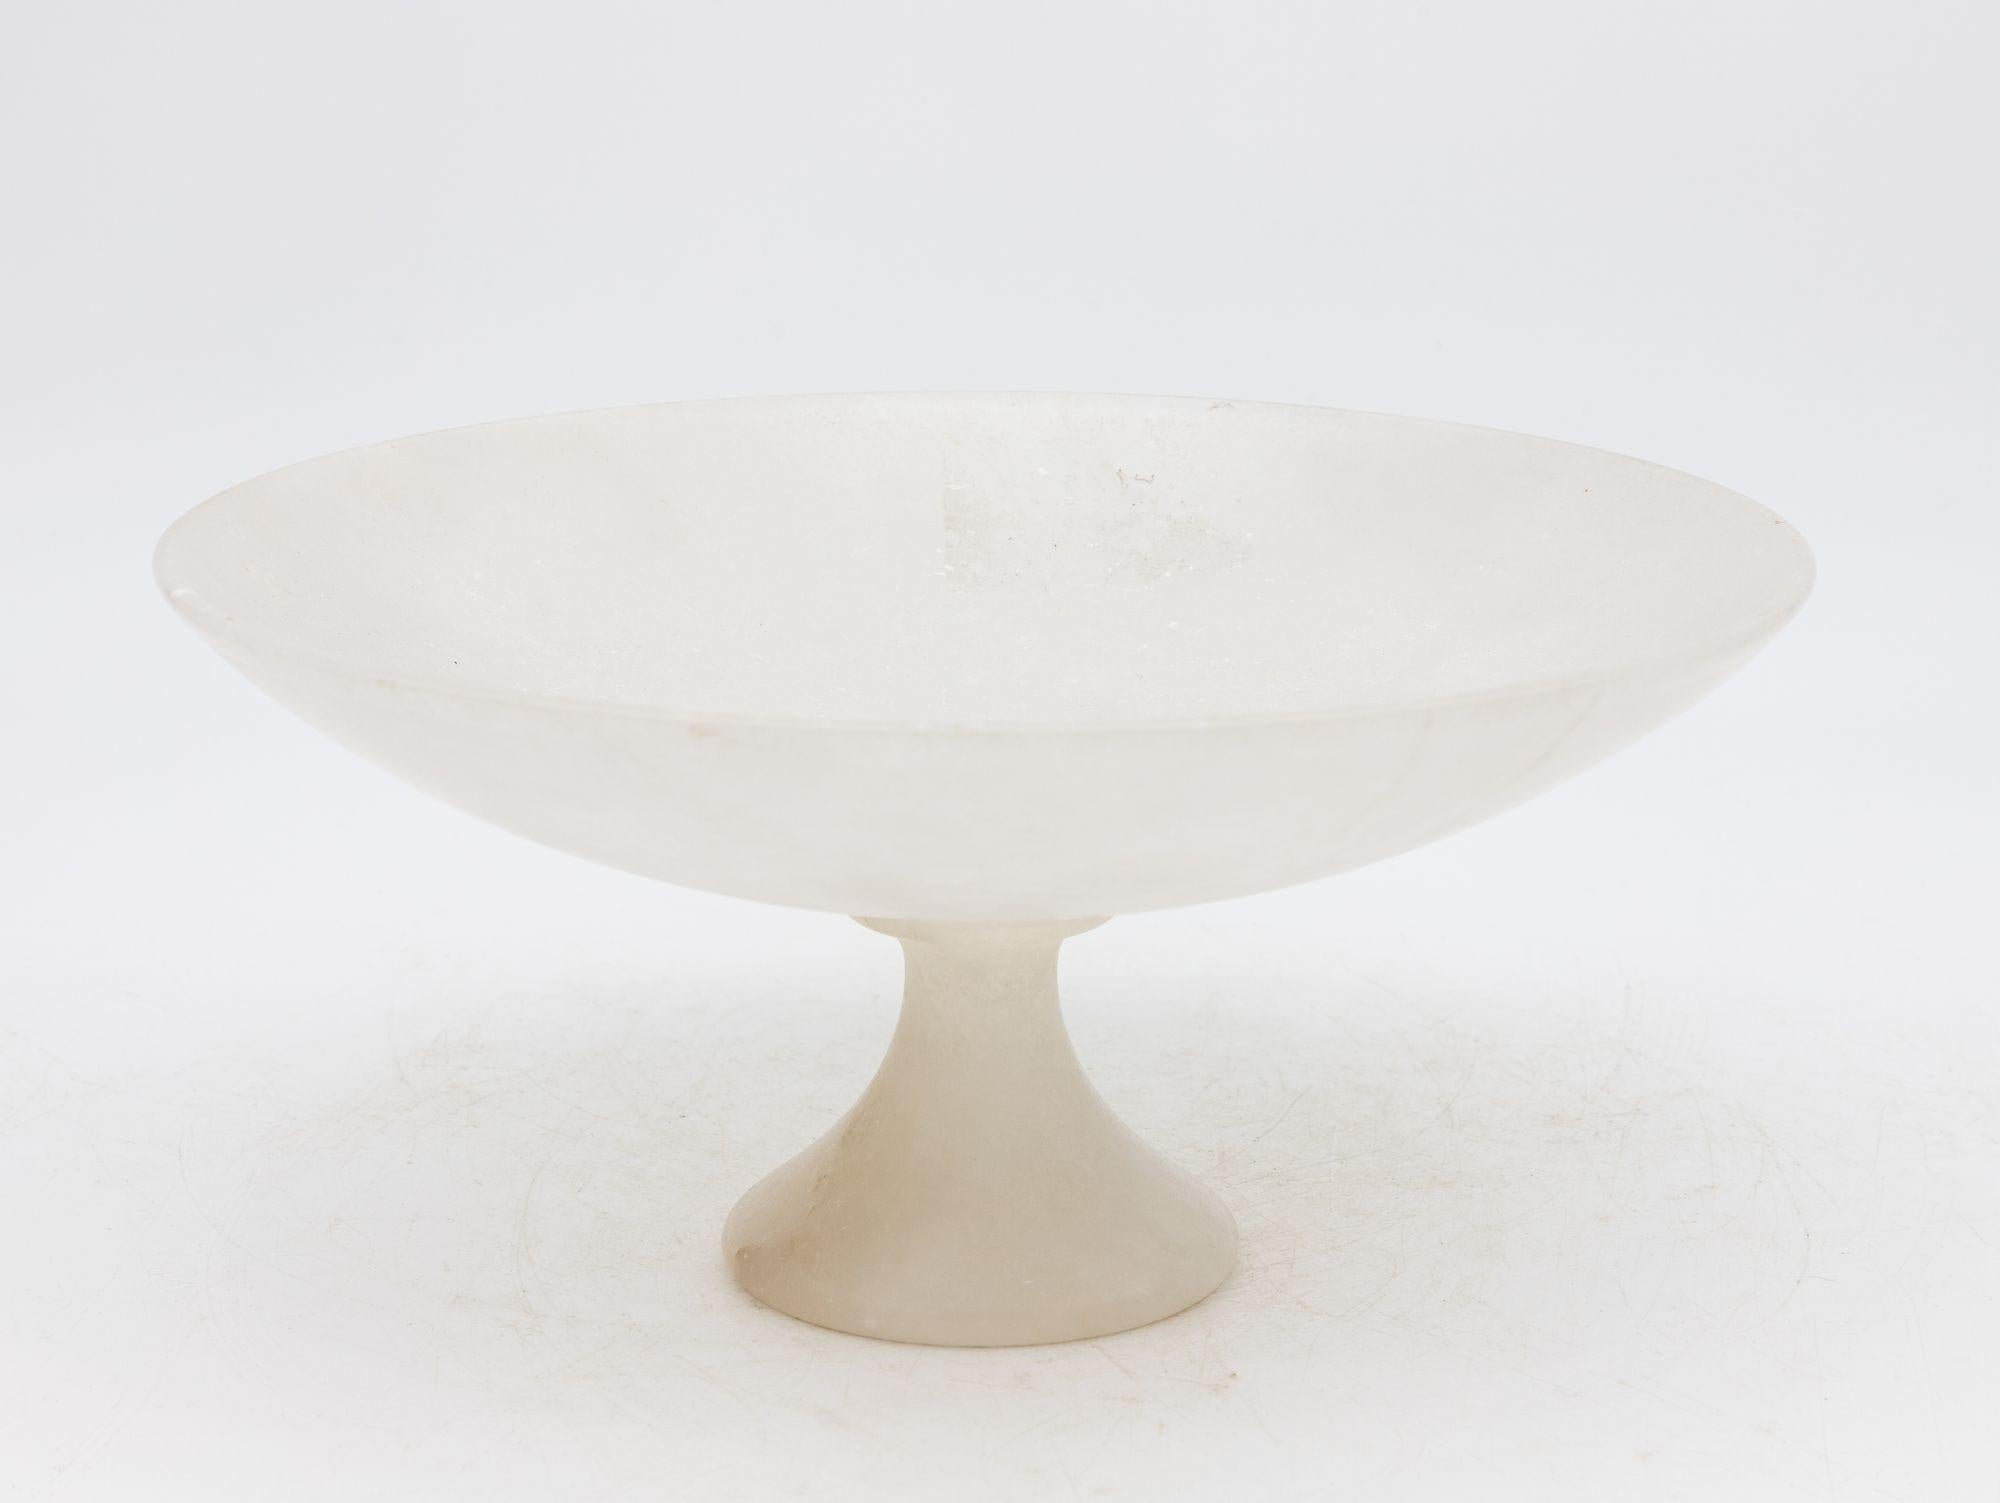 Translucent Neoclassical Alabaster Compote, Italian Early 20th Century For Sale 1